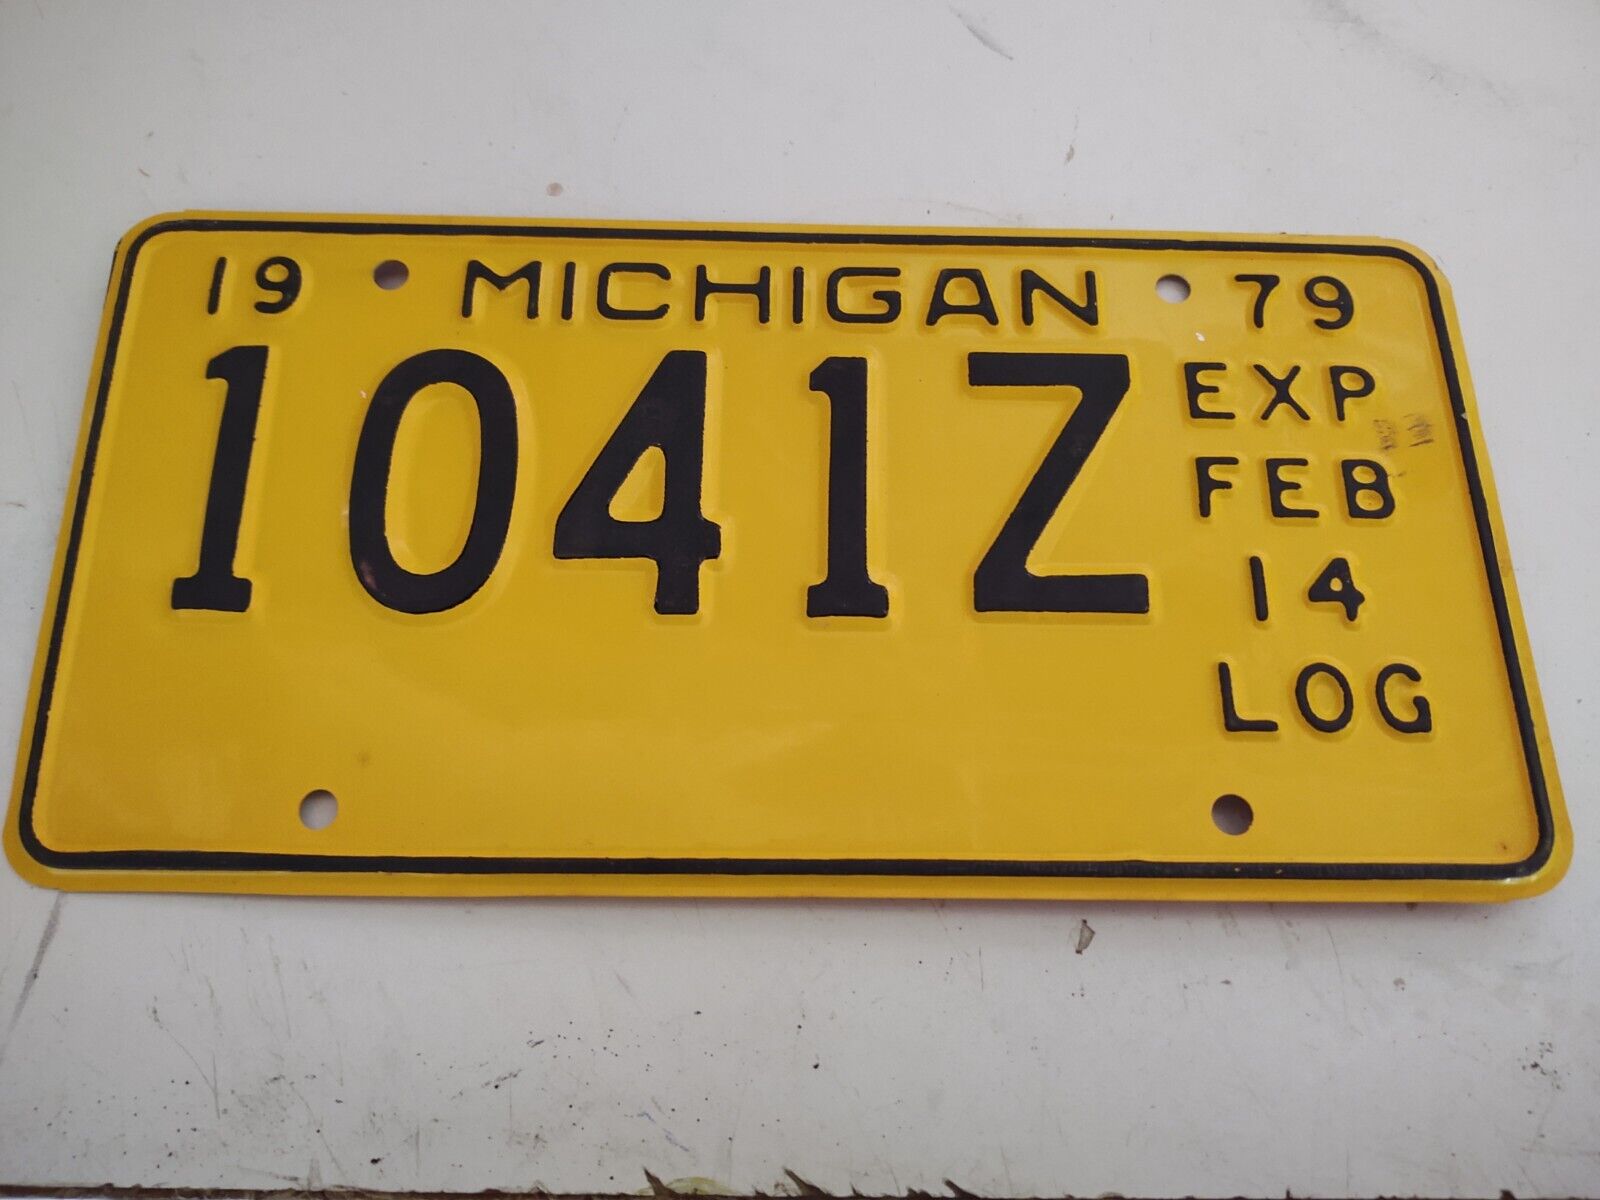 Obsolete 1979 Michigan Log 1043z License Plate  Black On Yellow Expired 3+ Years